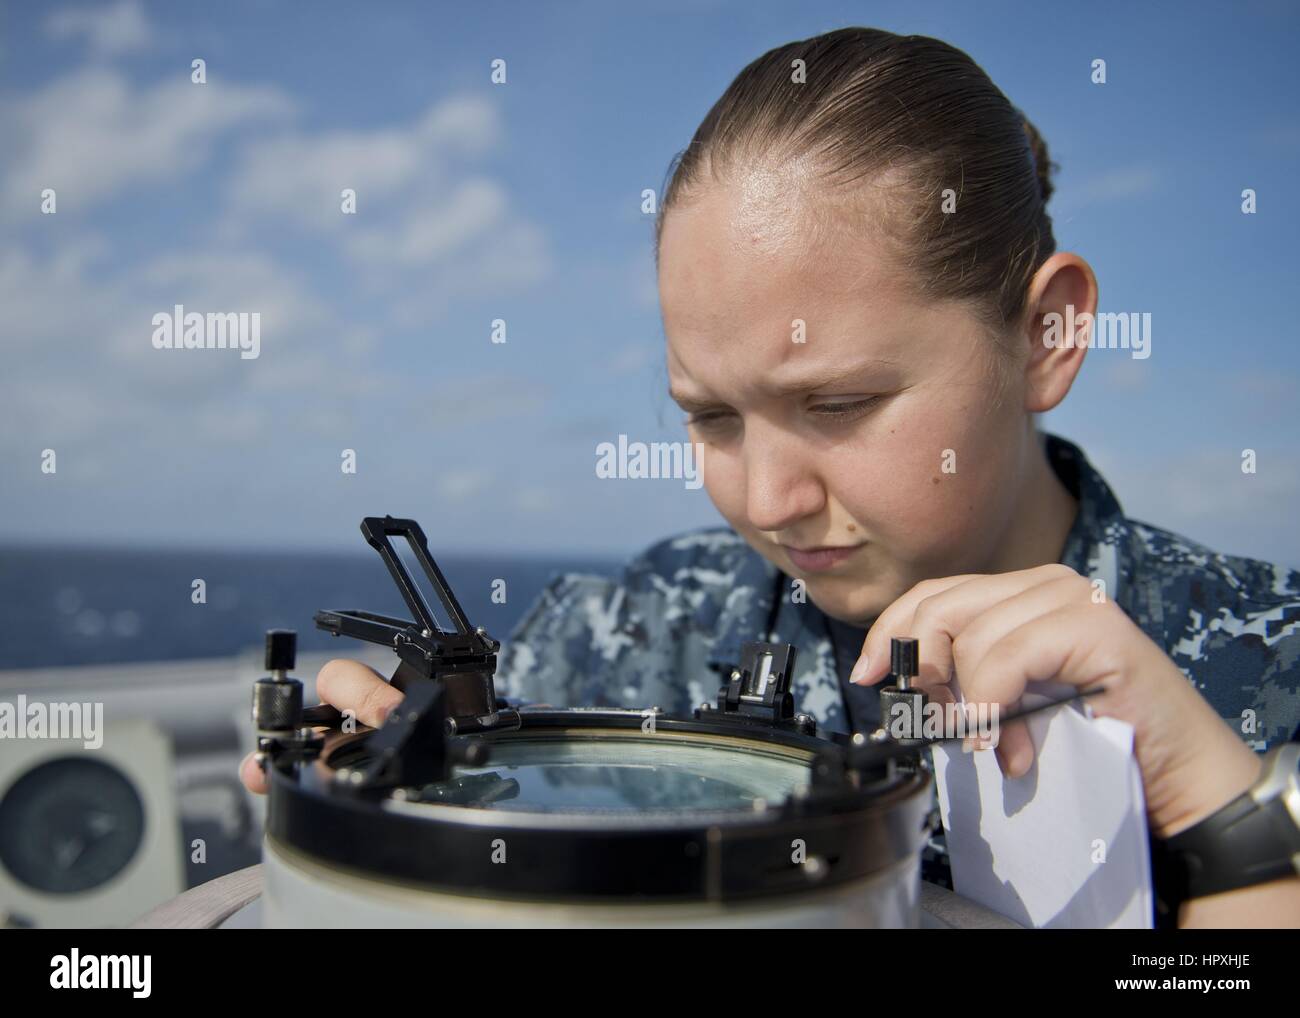 Quartermaster Seaman Kimberly Pups uses an azimuth circle to read the bearing to the sun from the port bridge wing of the Whidbey Island-class amphibious dock landing ship USS Tortuga (LSD 46), February 5, 2013. Image courtesy US Navy. Stock Photo